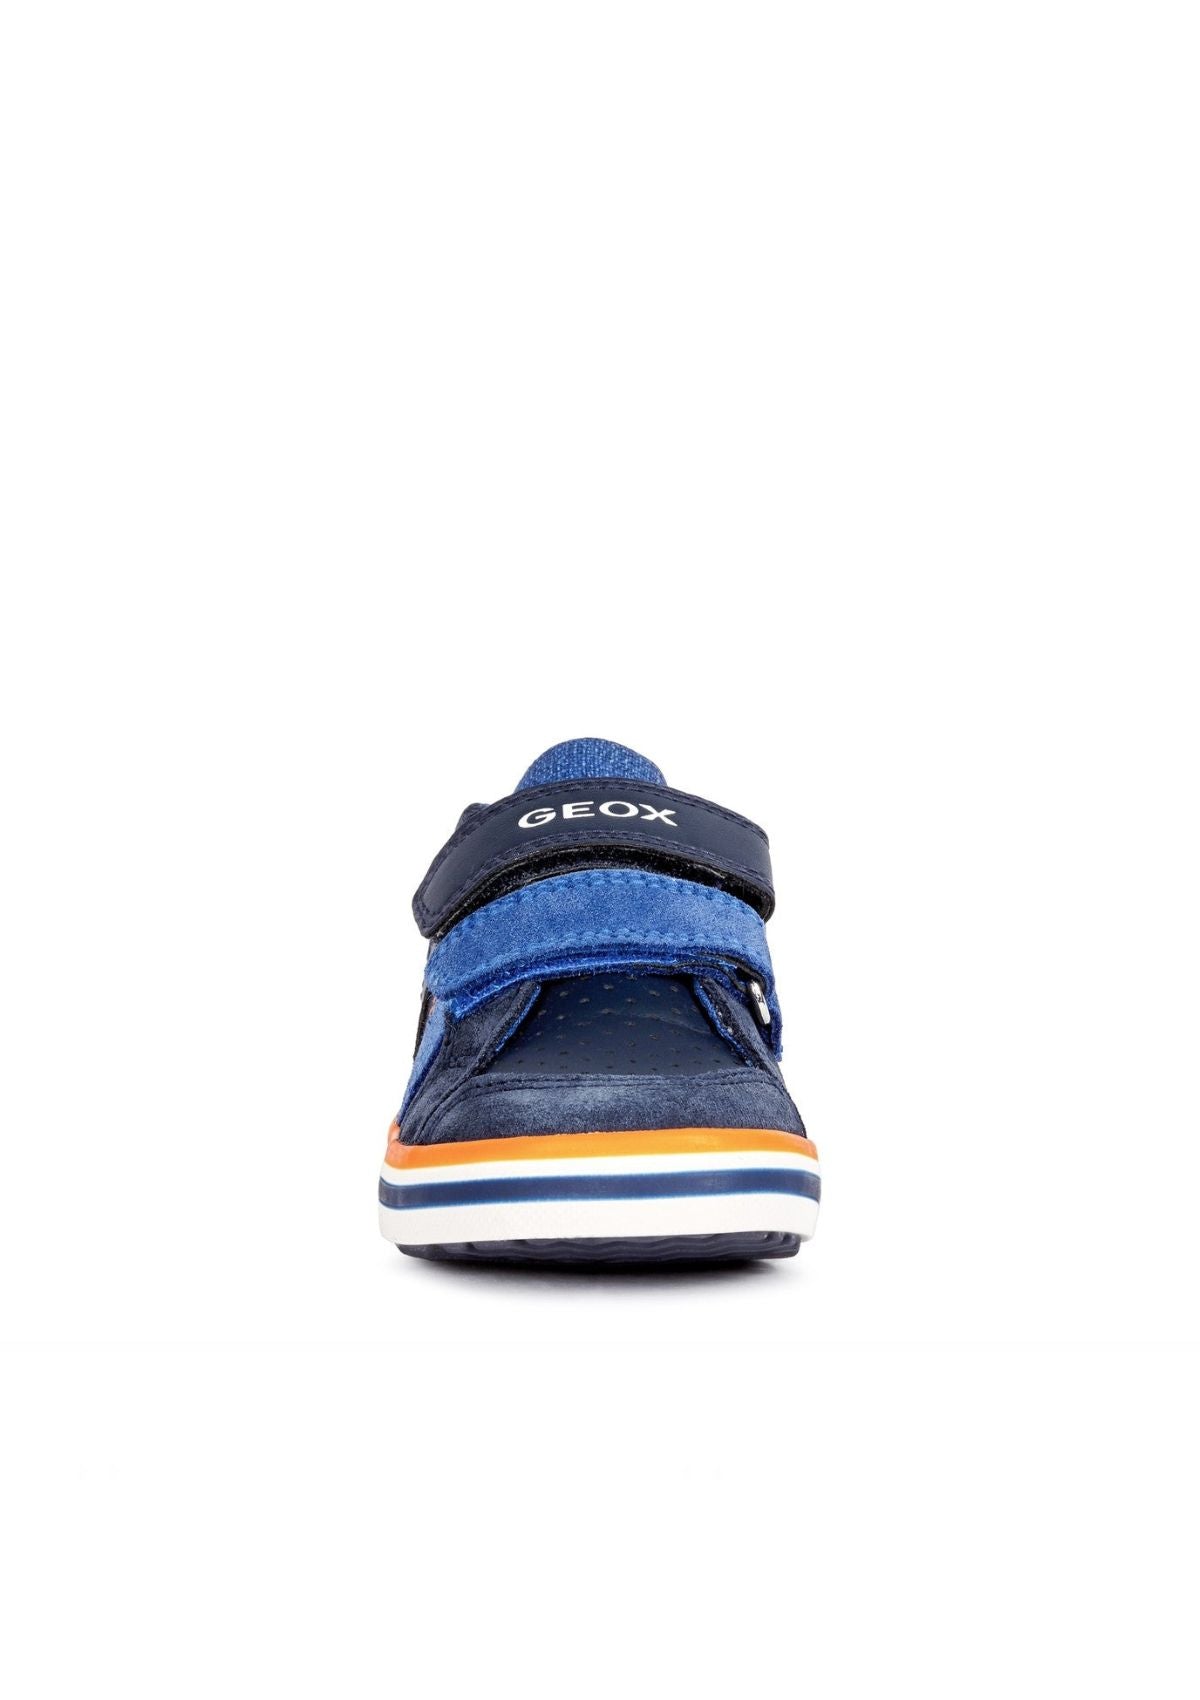 Geox Baby Boys KILWI Trainer - Navy/Royal Front